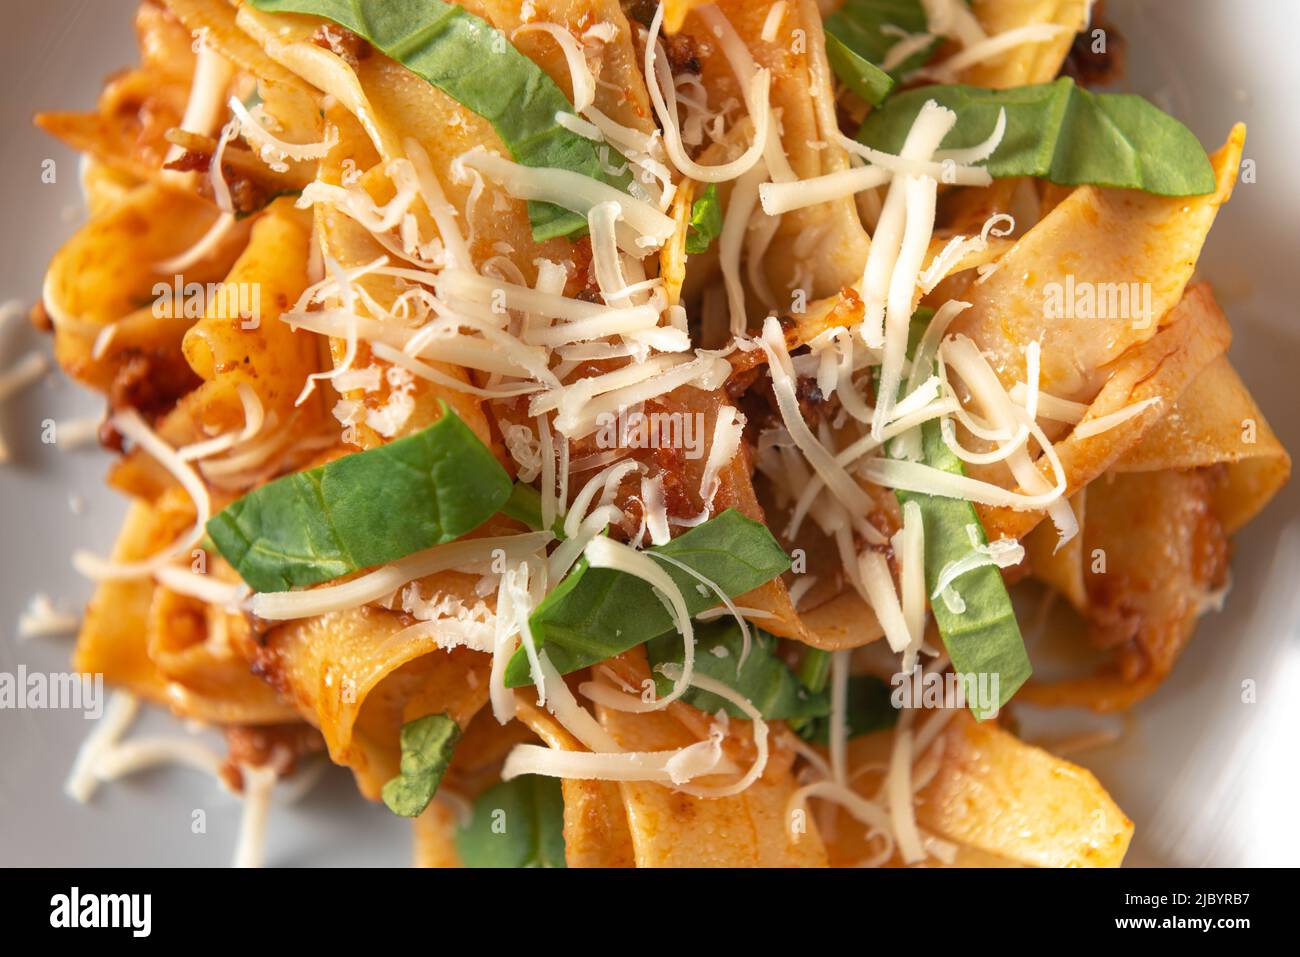 Pasta bolognese. Traditional tagliatelle with meat sauce italian dish of pasta with tomato and meat mince sauce served in a plate with parmesan cheese Stock Photo